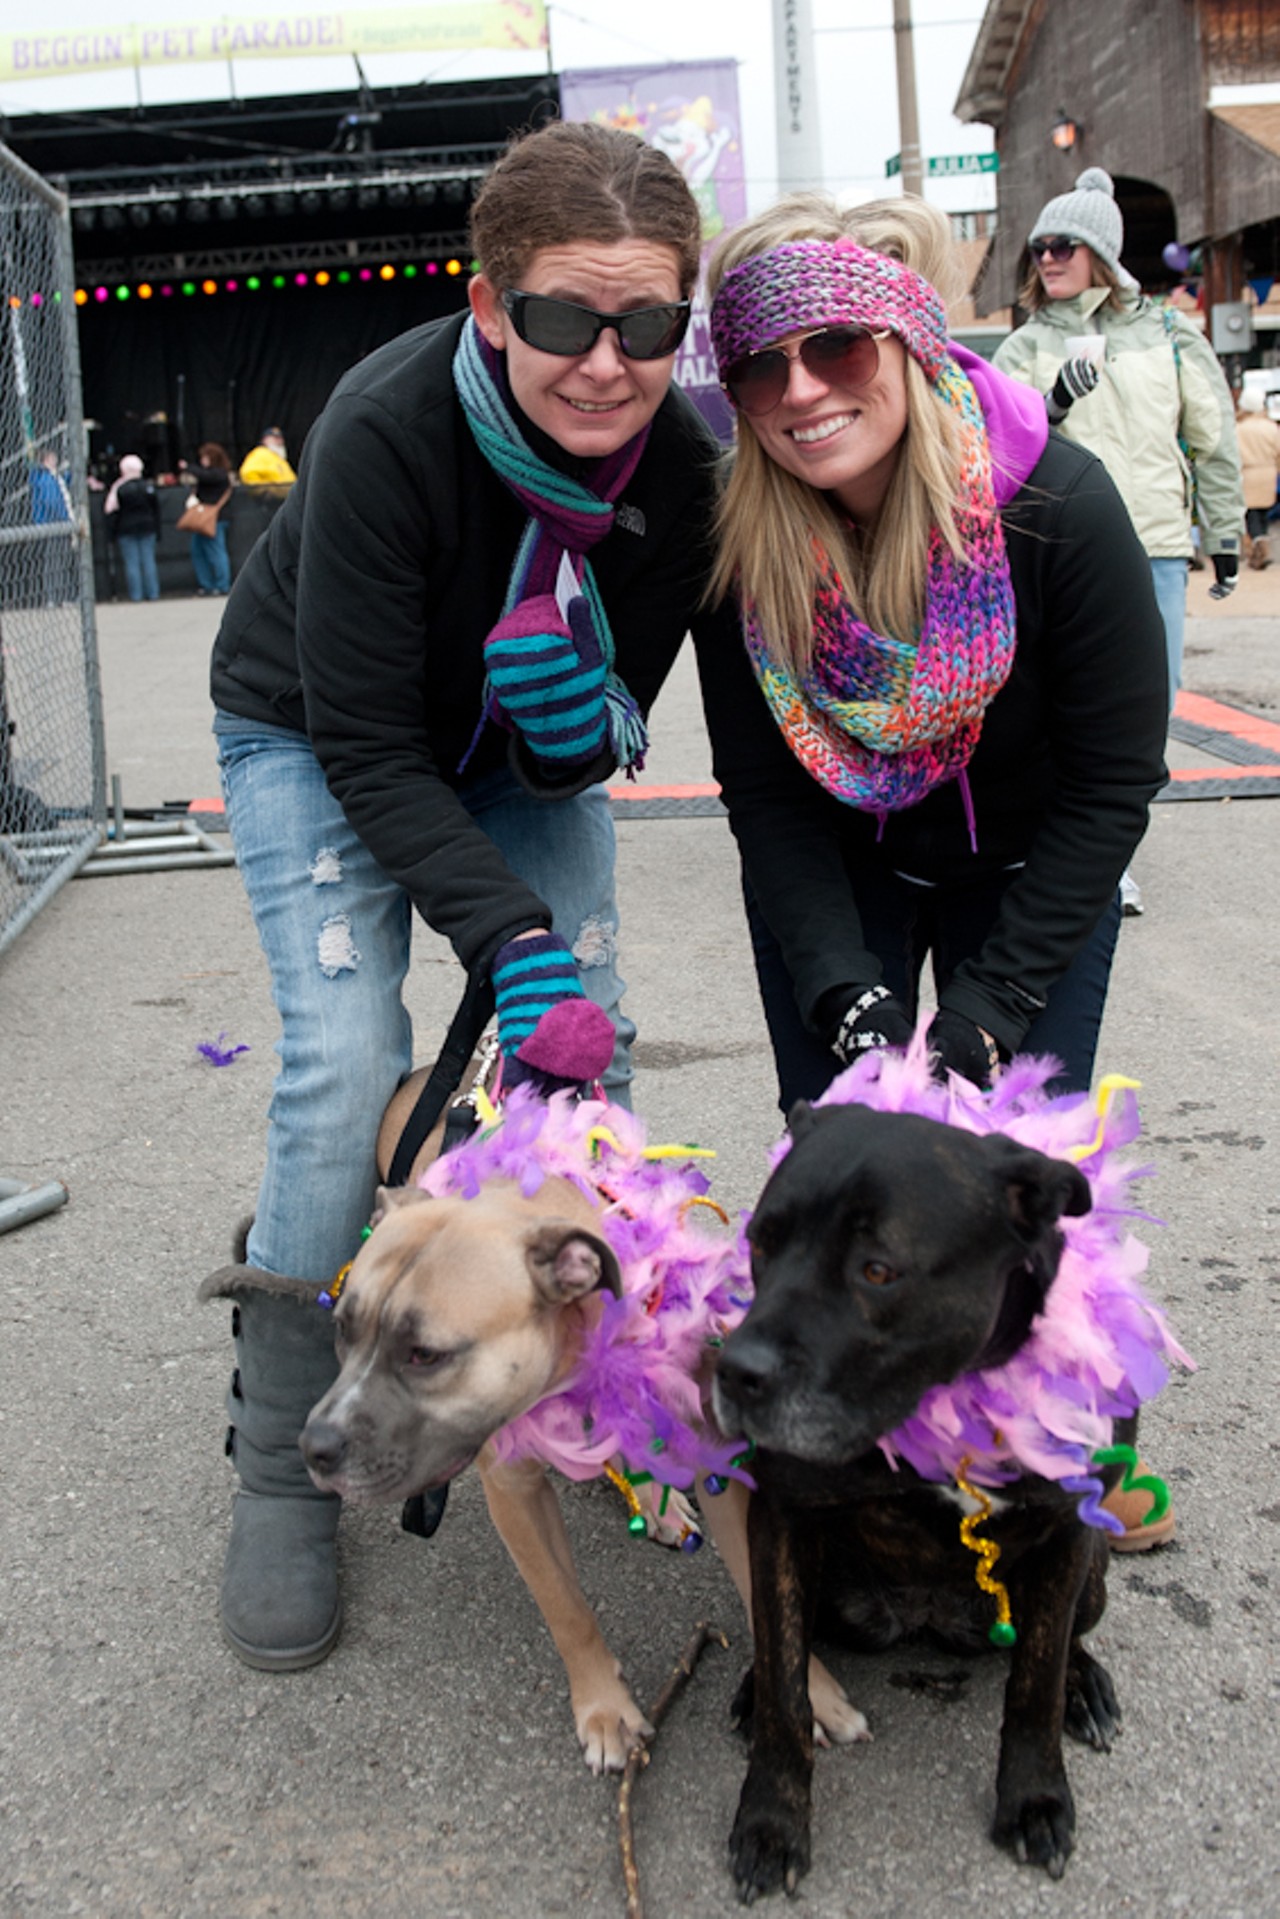 Beggin' Pet Parade, with Andy Cohen and Barenaked Ladies